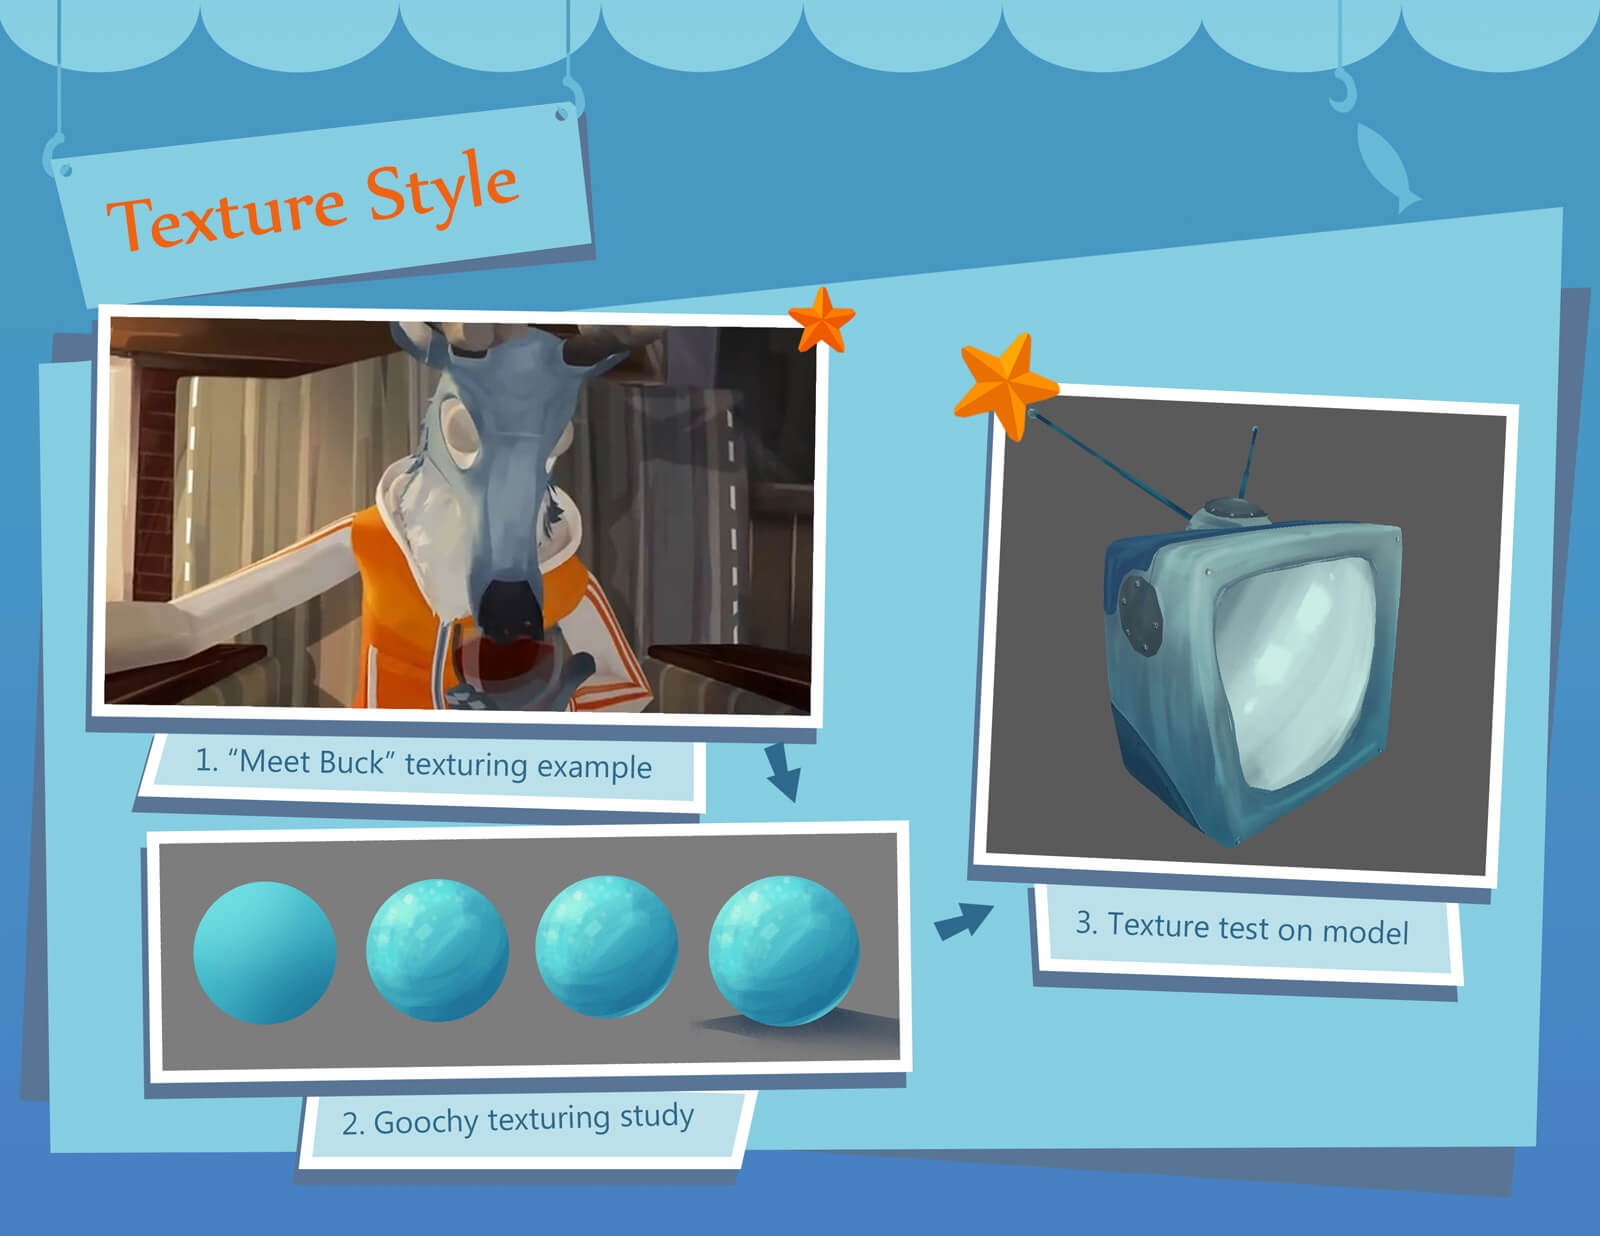 Presentation slide for the film Bait & Switch depicting the style of texturing used for various objects